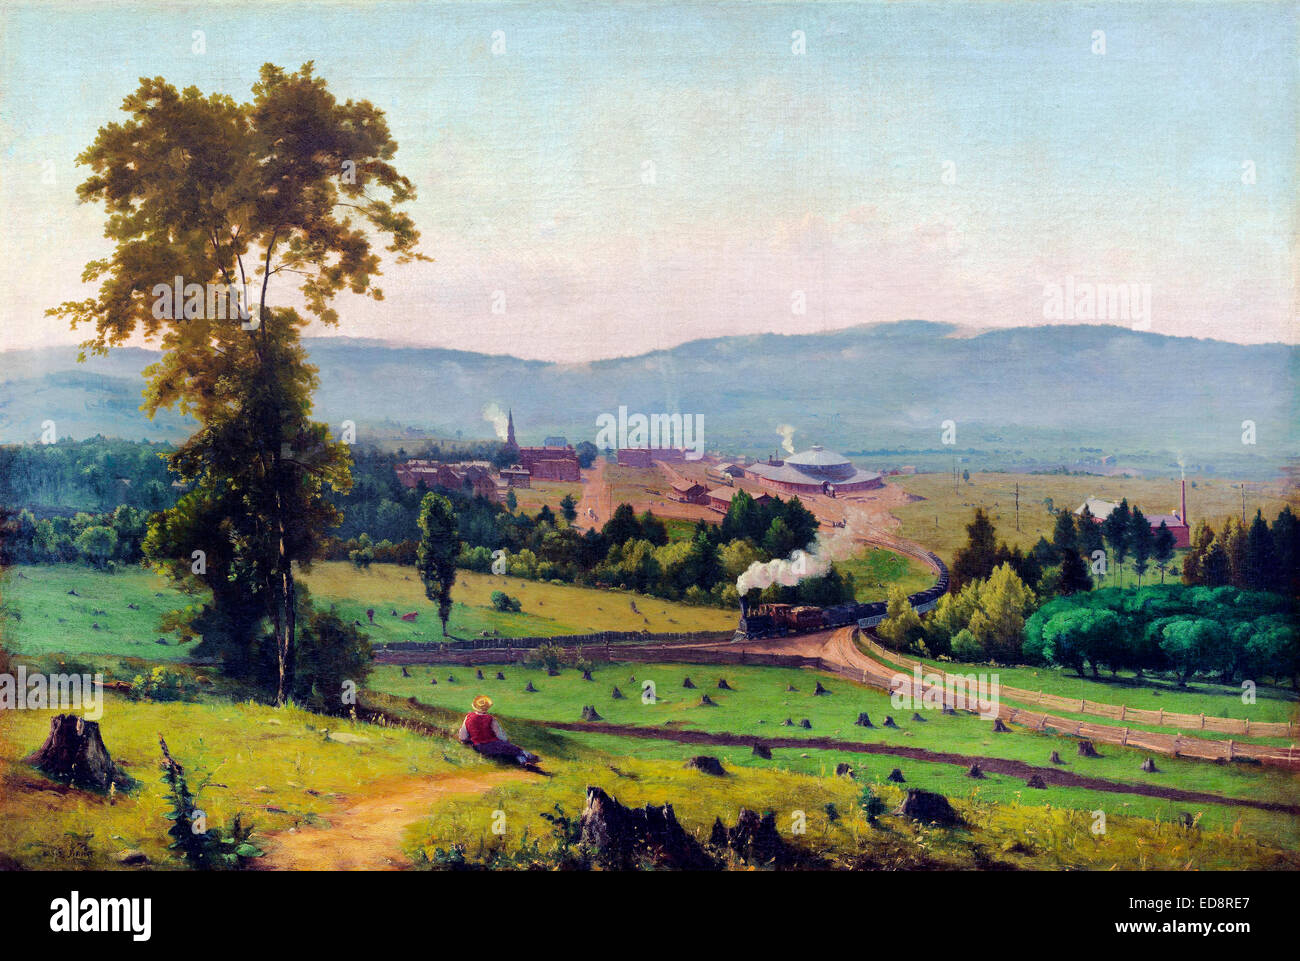 George Inness The Lackawanna Valley. Circa 1856. Oil on canvas. National Gallery of Art, Washington, D.C., USA. Stock Photo